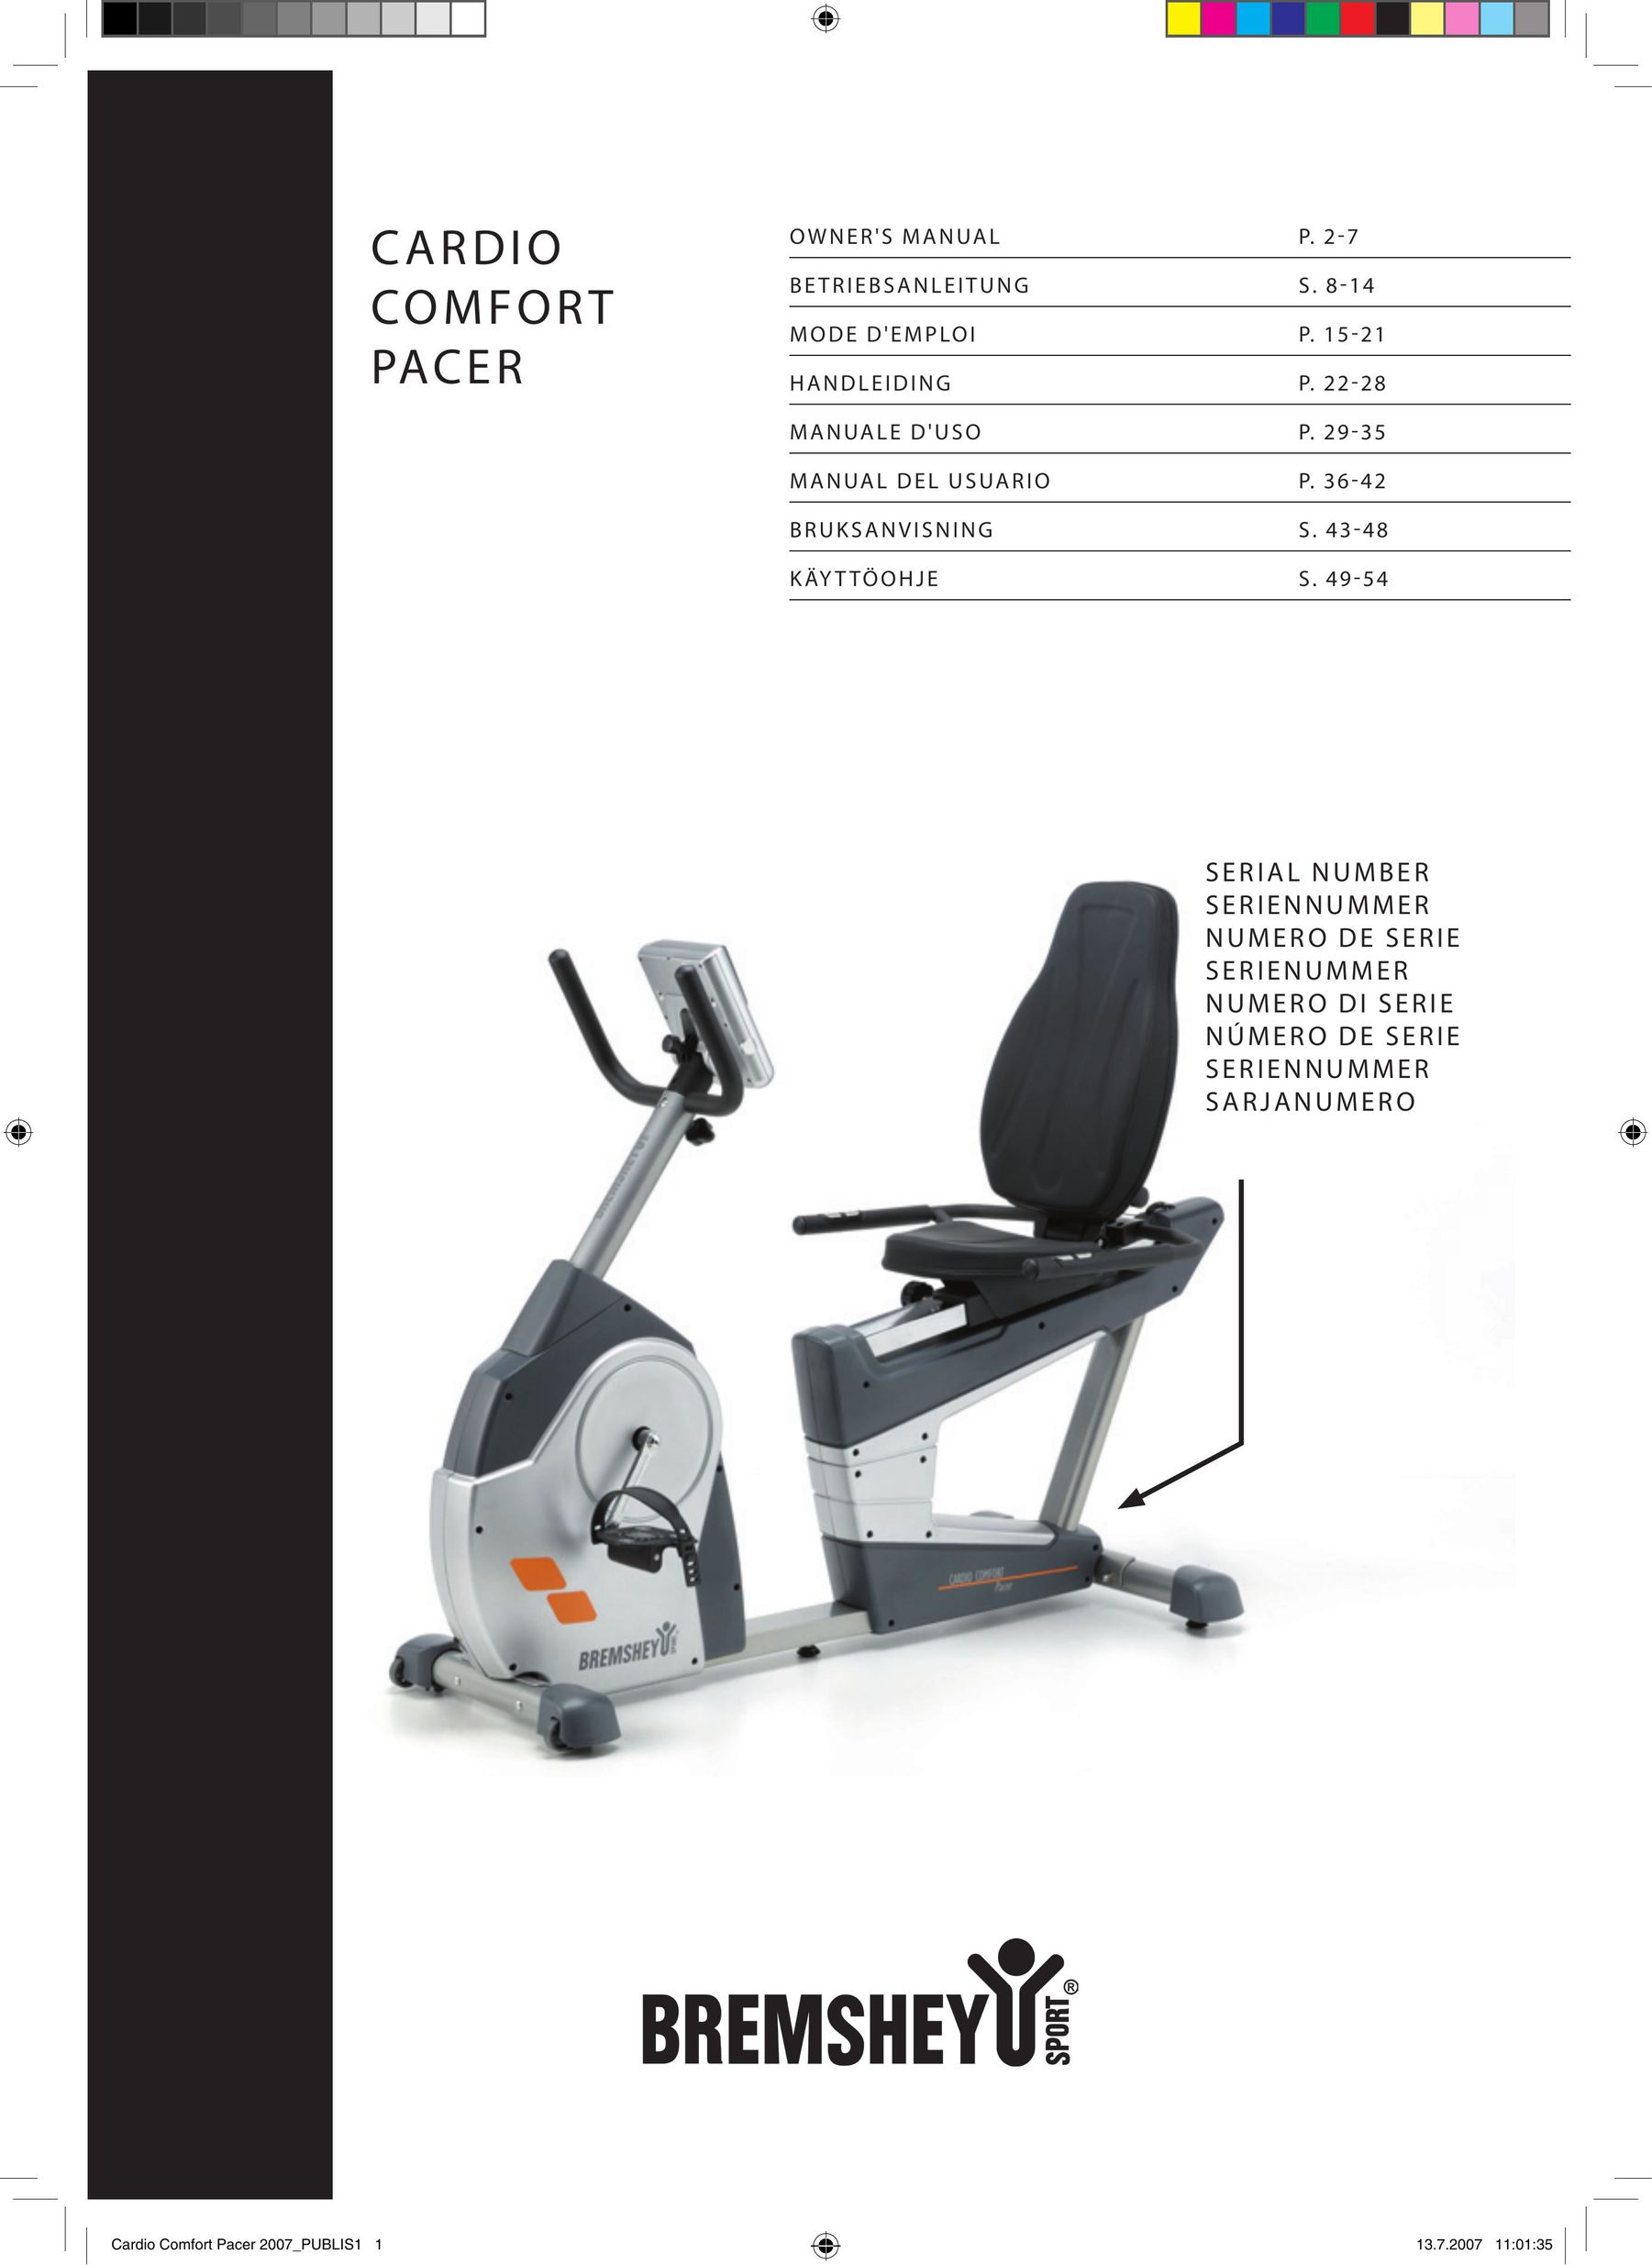 Accell Cardio Comfort Pacer Bicycle Accessories User Manual (Page 1)